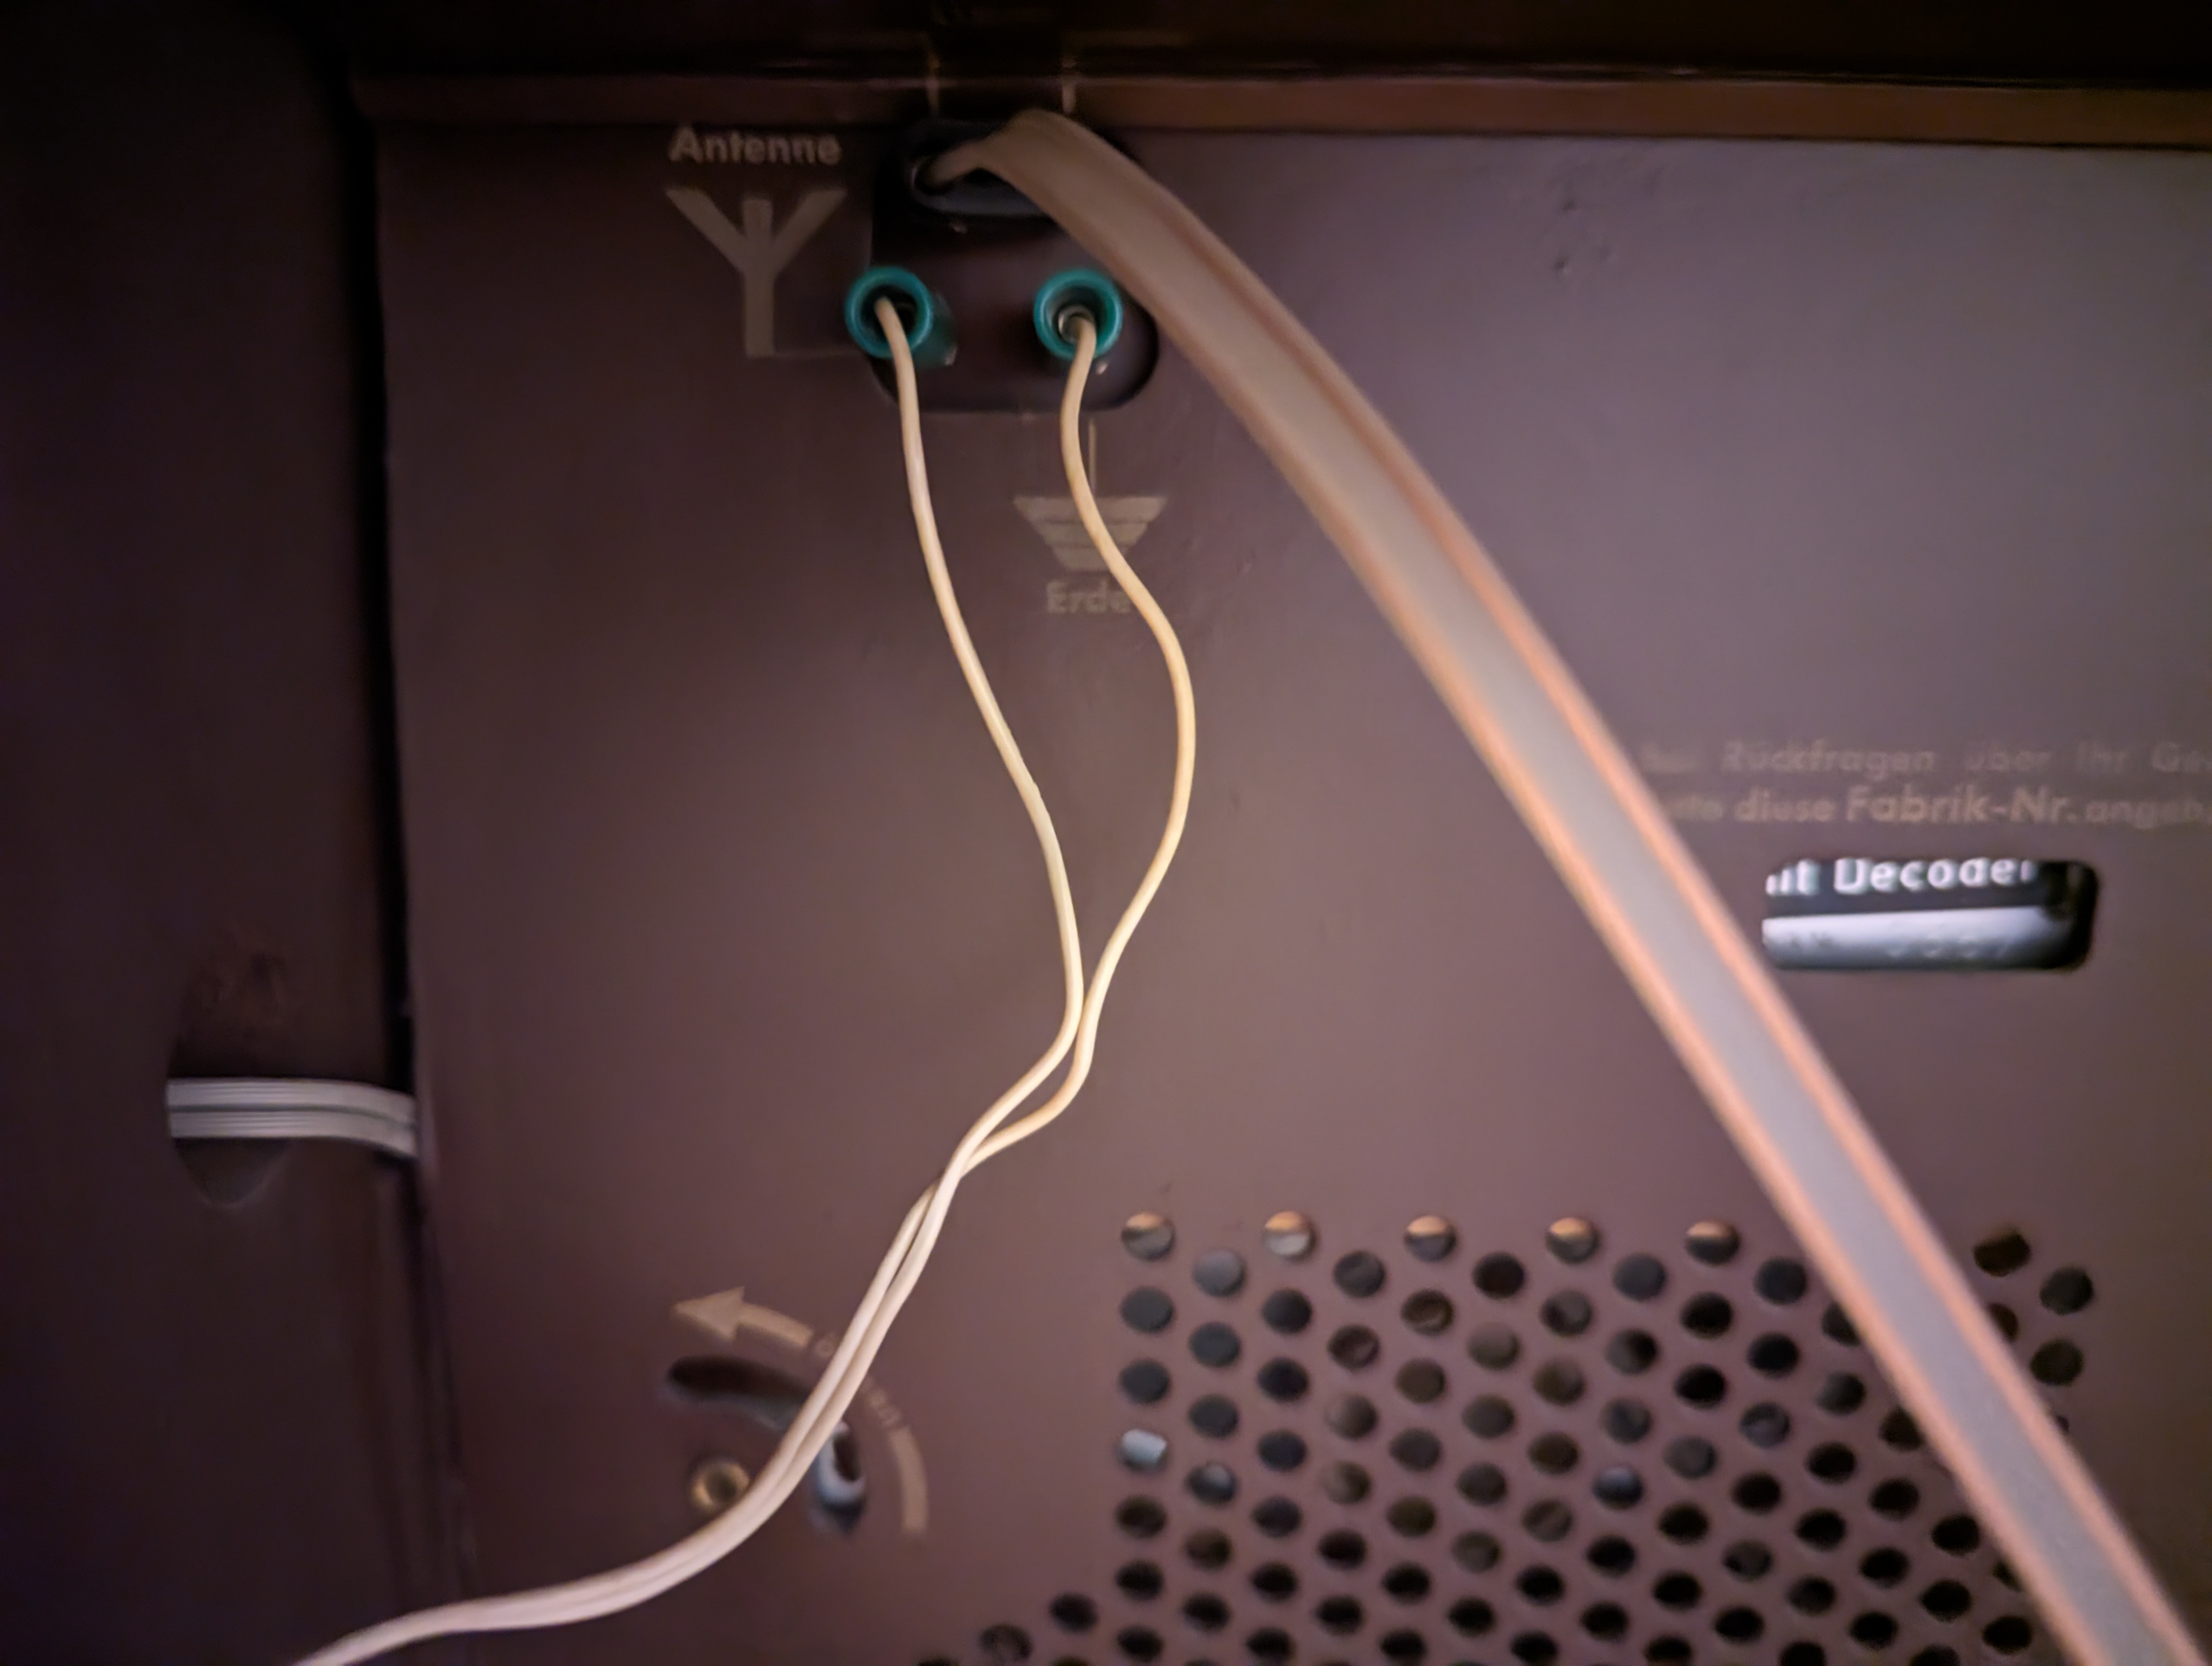 The backside of the appliance showing two connectors. One is labelled"Antenne" and the other"Erdung". The latter has two male connectors attached to cables plugged in.